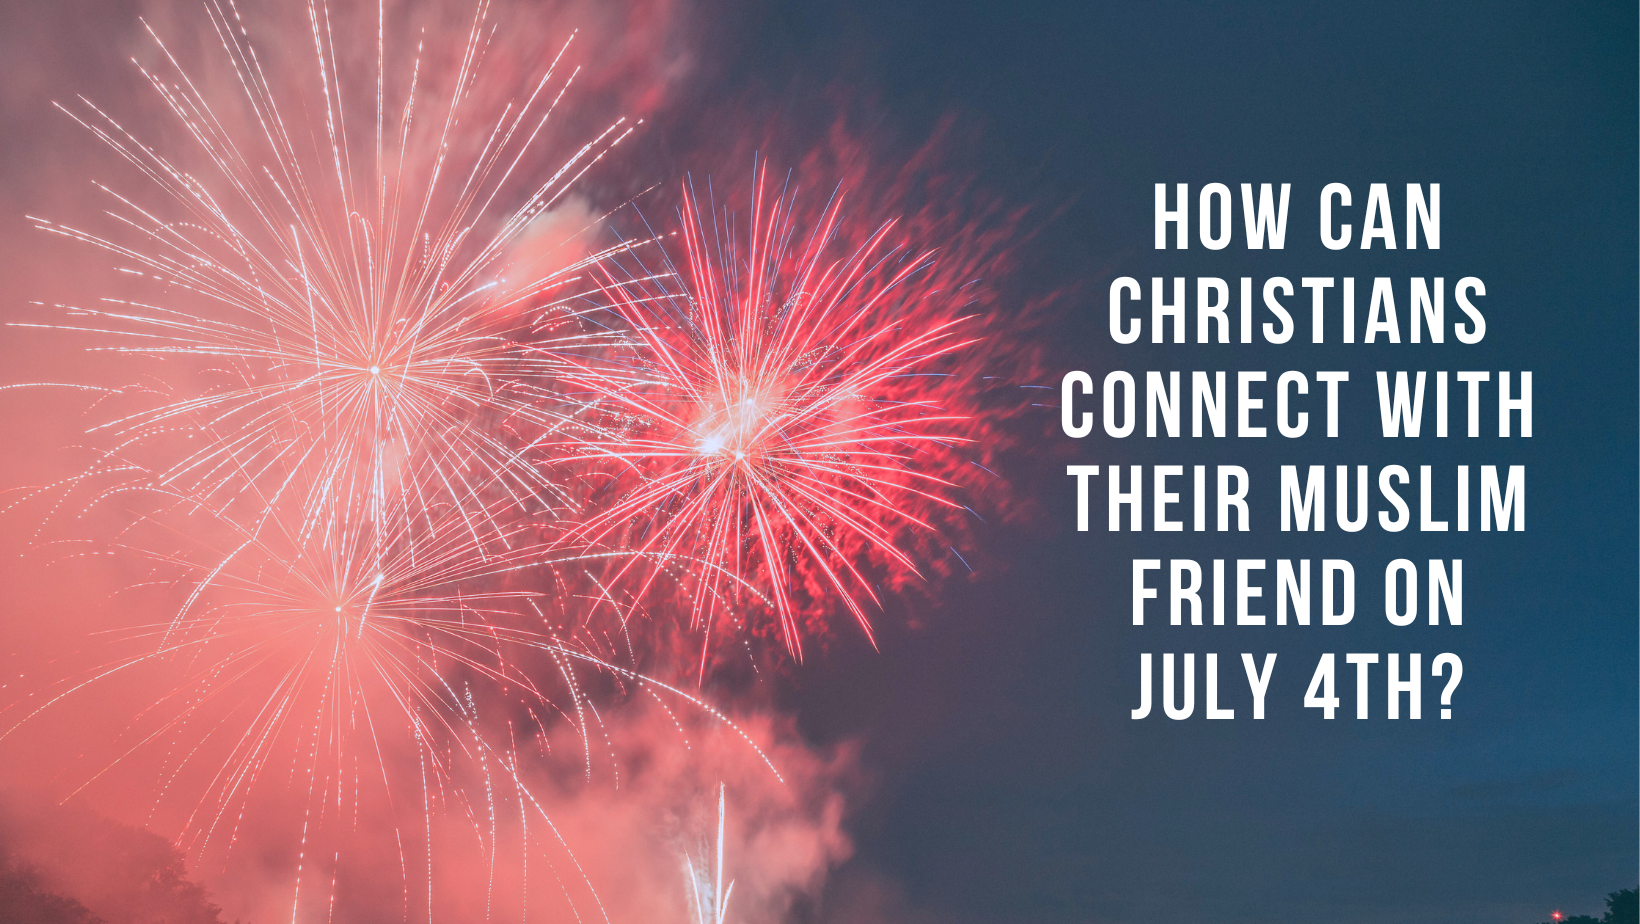 How can Christians connect with their Muslim friend on July 4th?